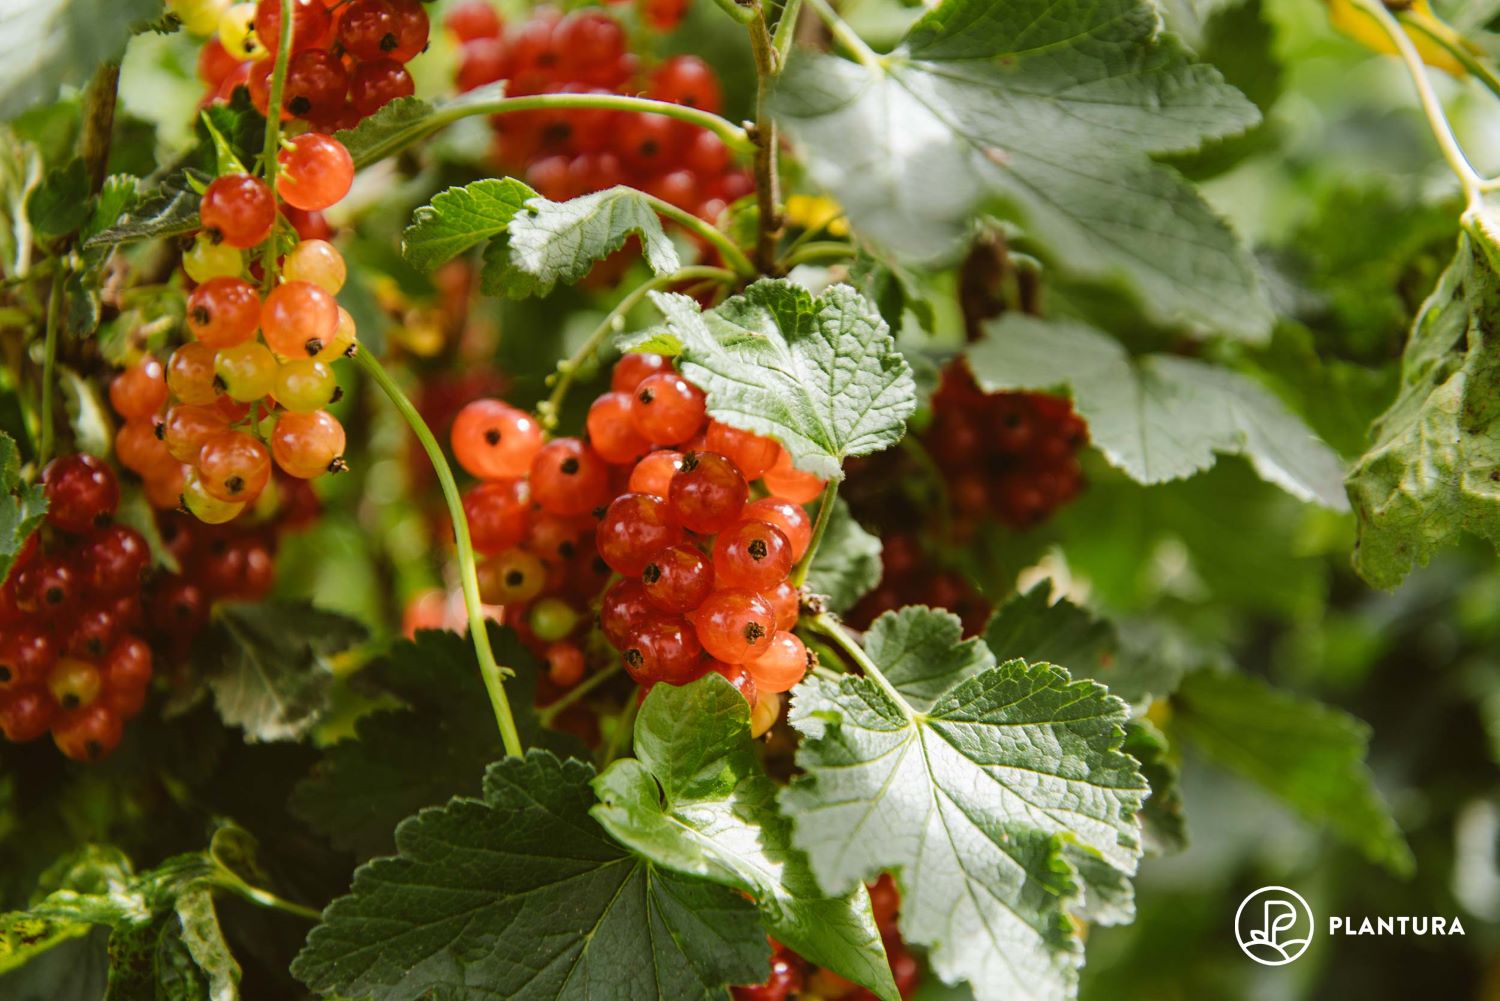 Red berries in summer - red currant bushes, raspberries, blackcurrant